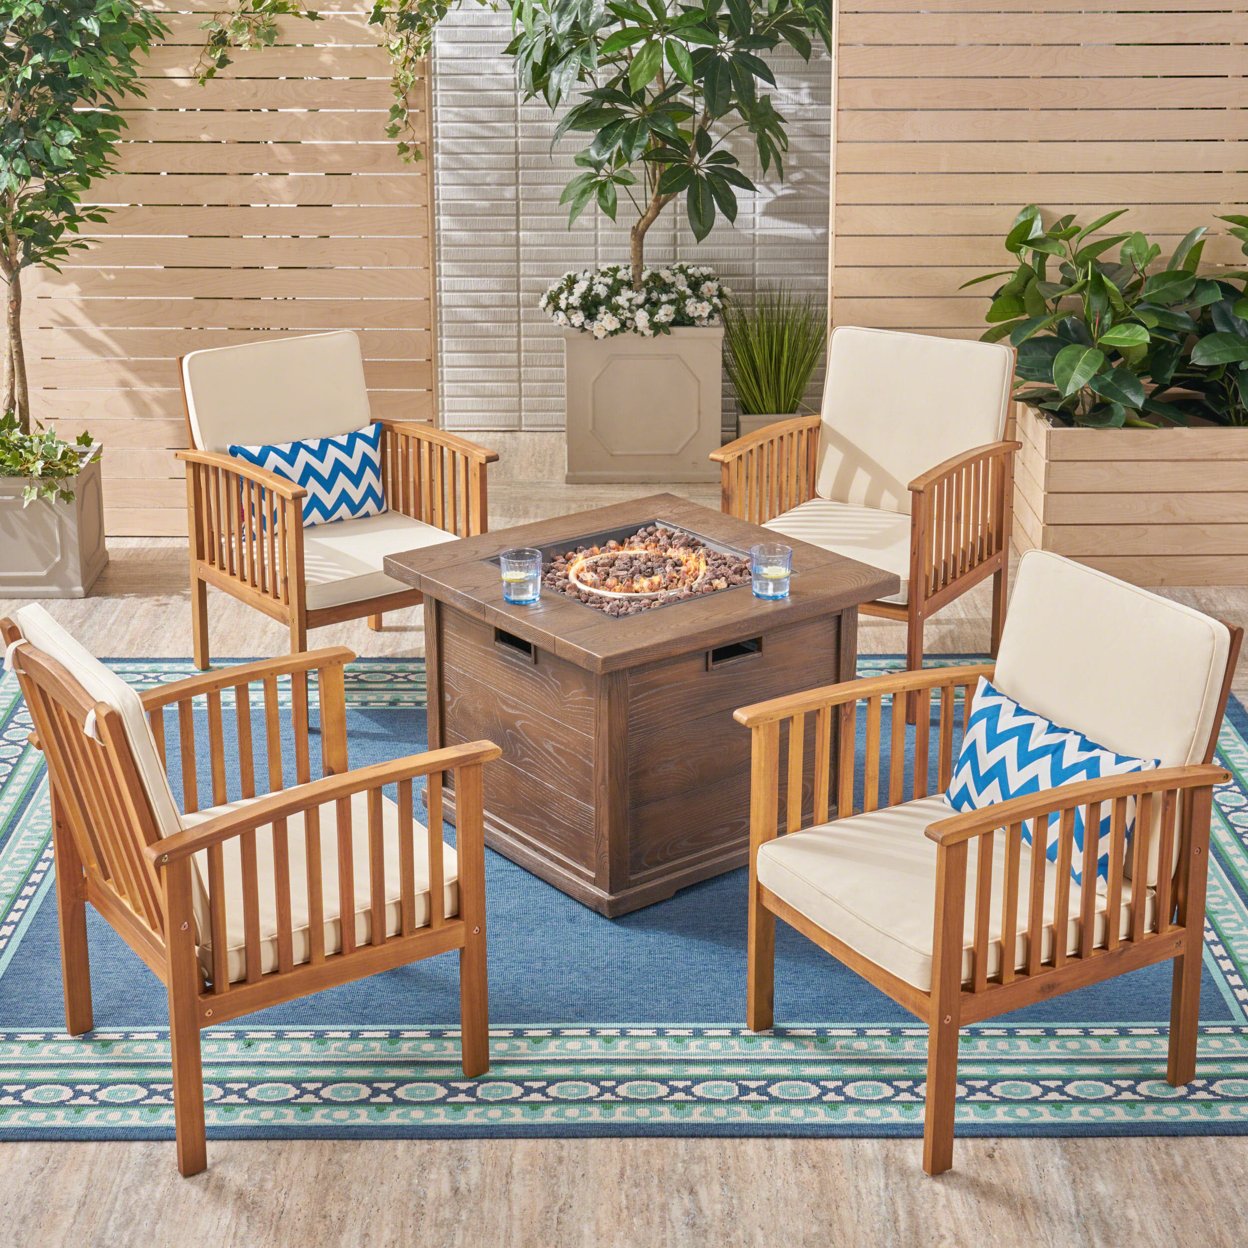 Carol Outdoor 4-Seater Acacia Wood Club Chairs With Firepit - Brown Patina Finish + Cream + Brown + Wood Pattern